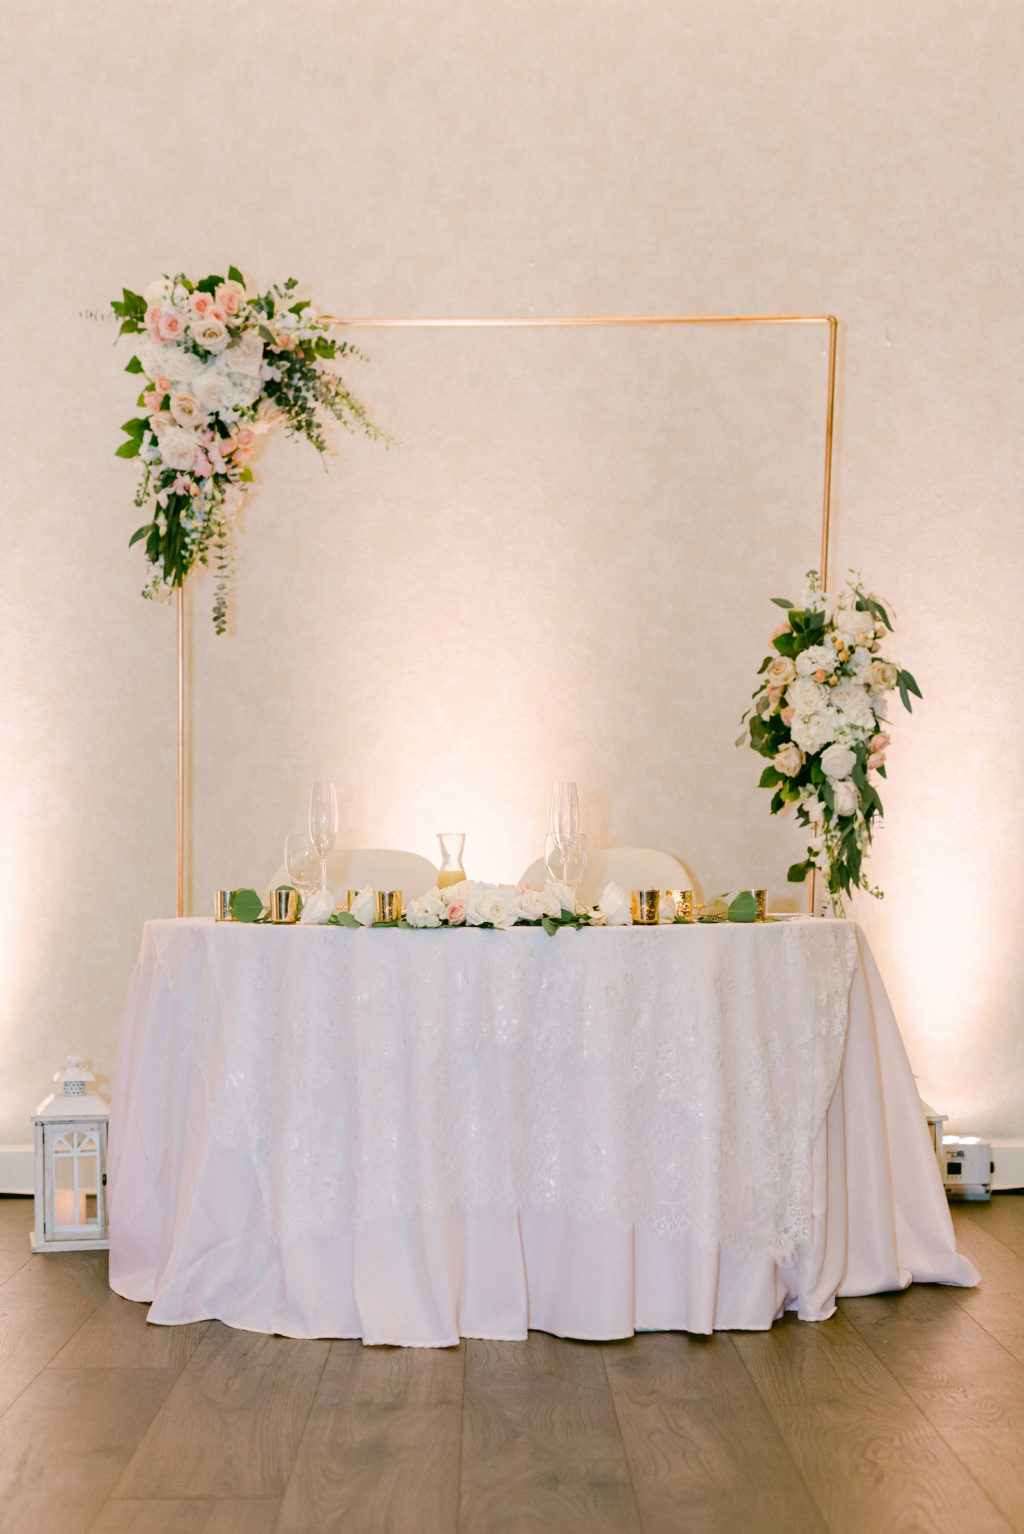 Romantic Classic Wedding Reception Decor, Gold Arch with Ivory and Blush Pink Floral Arrangements